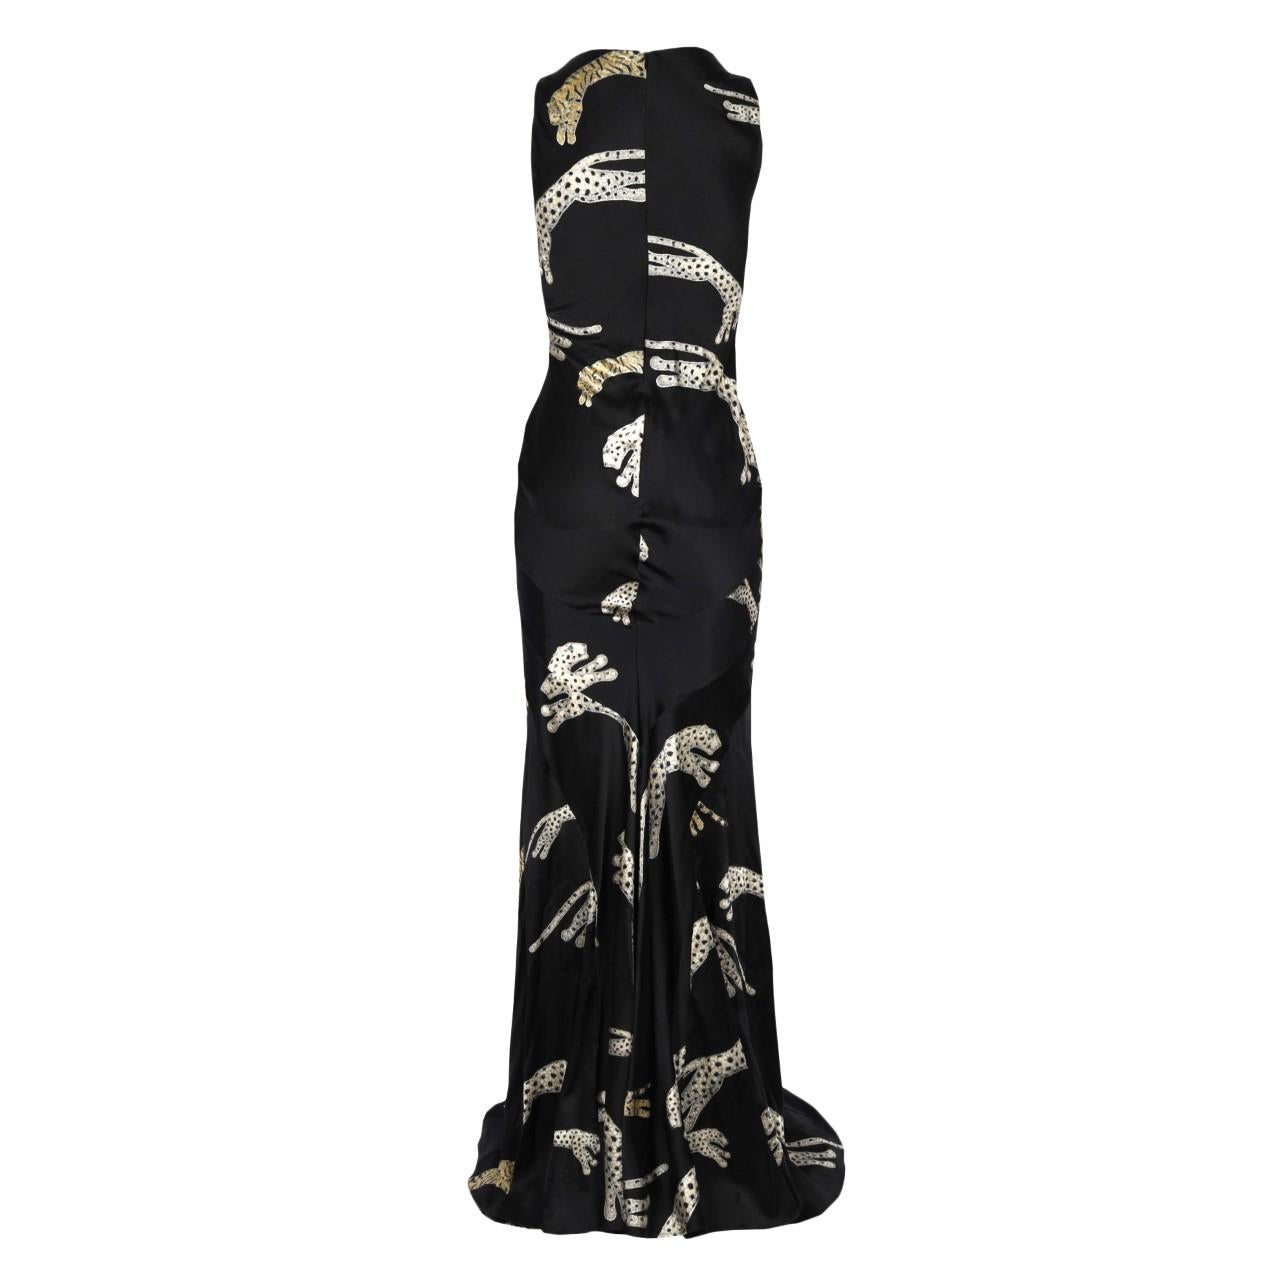 The Roberto Cavalli leopard and tiger silk maxi dress is fully lined and celebrates the feminine silhouette with its embracing fit. Made with 100% silk, the maxi dress ensures unrivaled comfort and lightness, and with the bold V-neck, the stunning